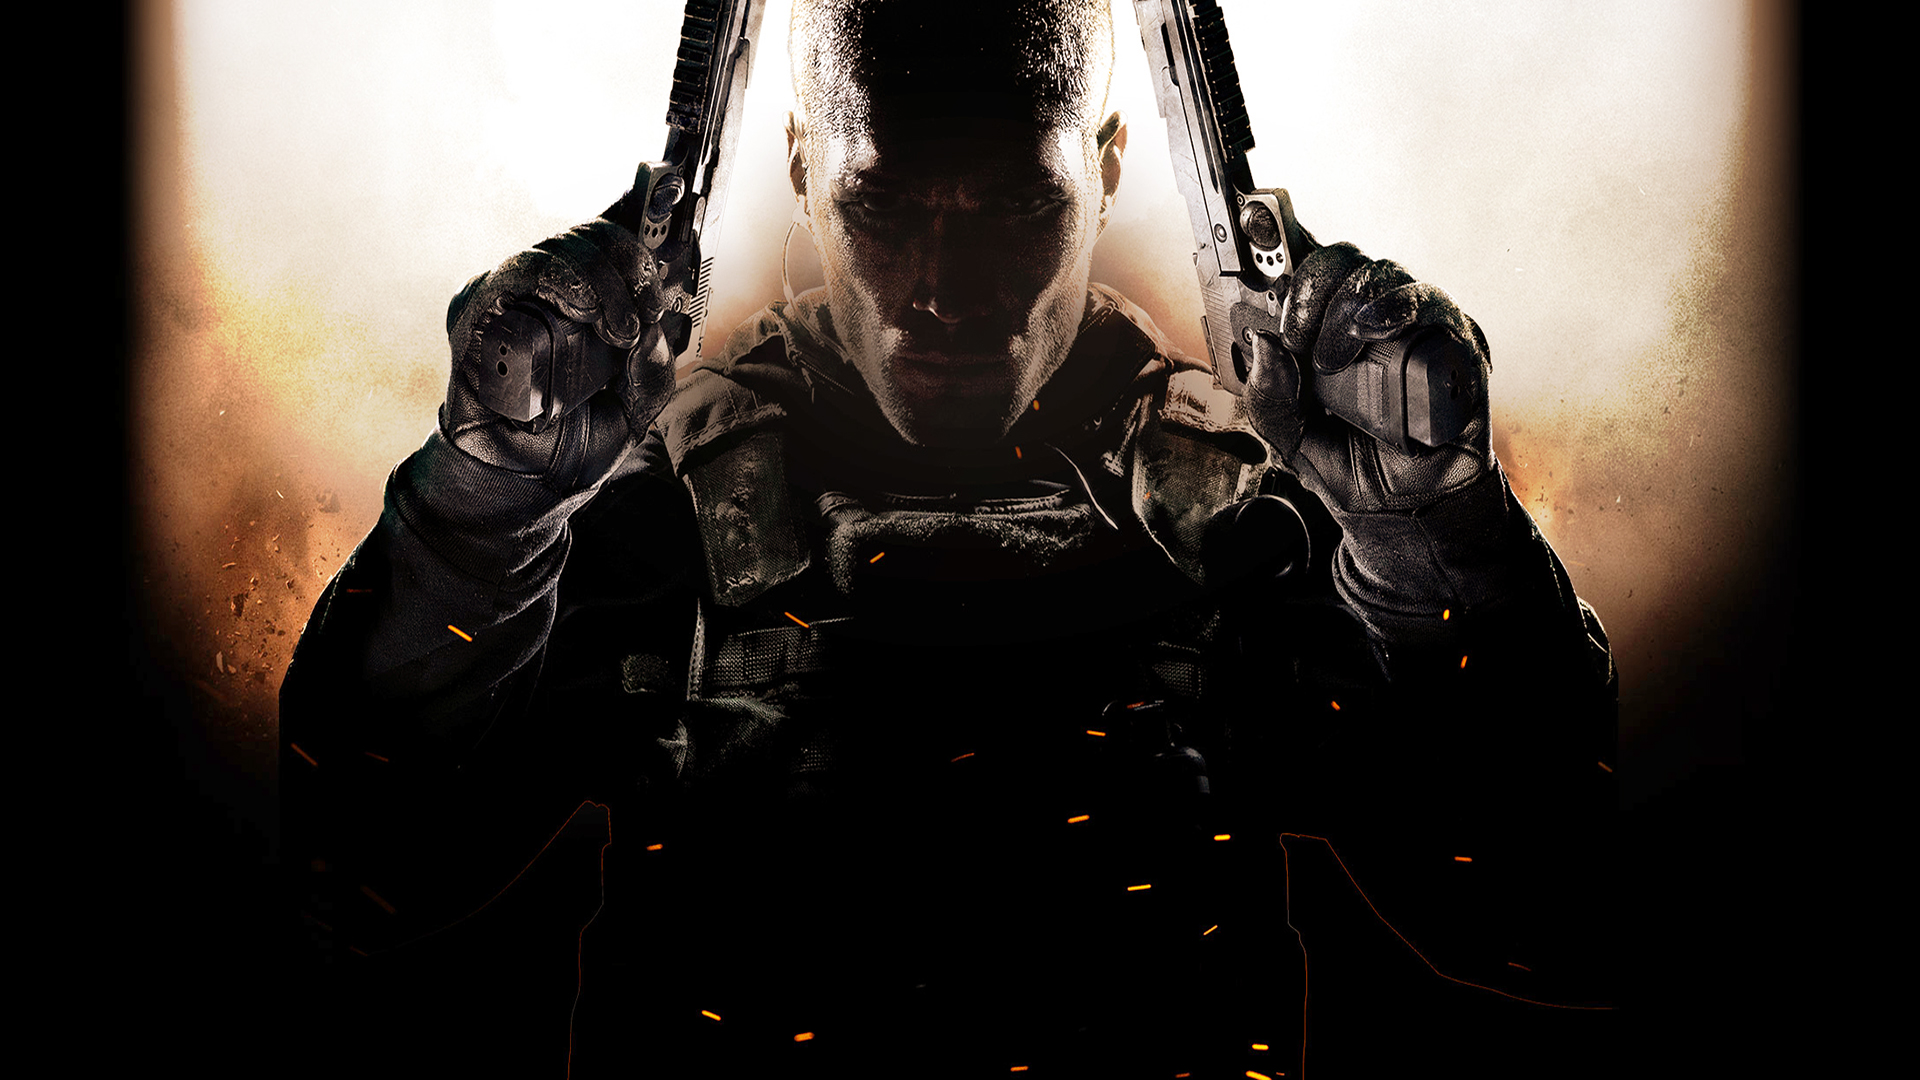 New Call Of Duty Black Ops Wallpapers Hd